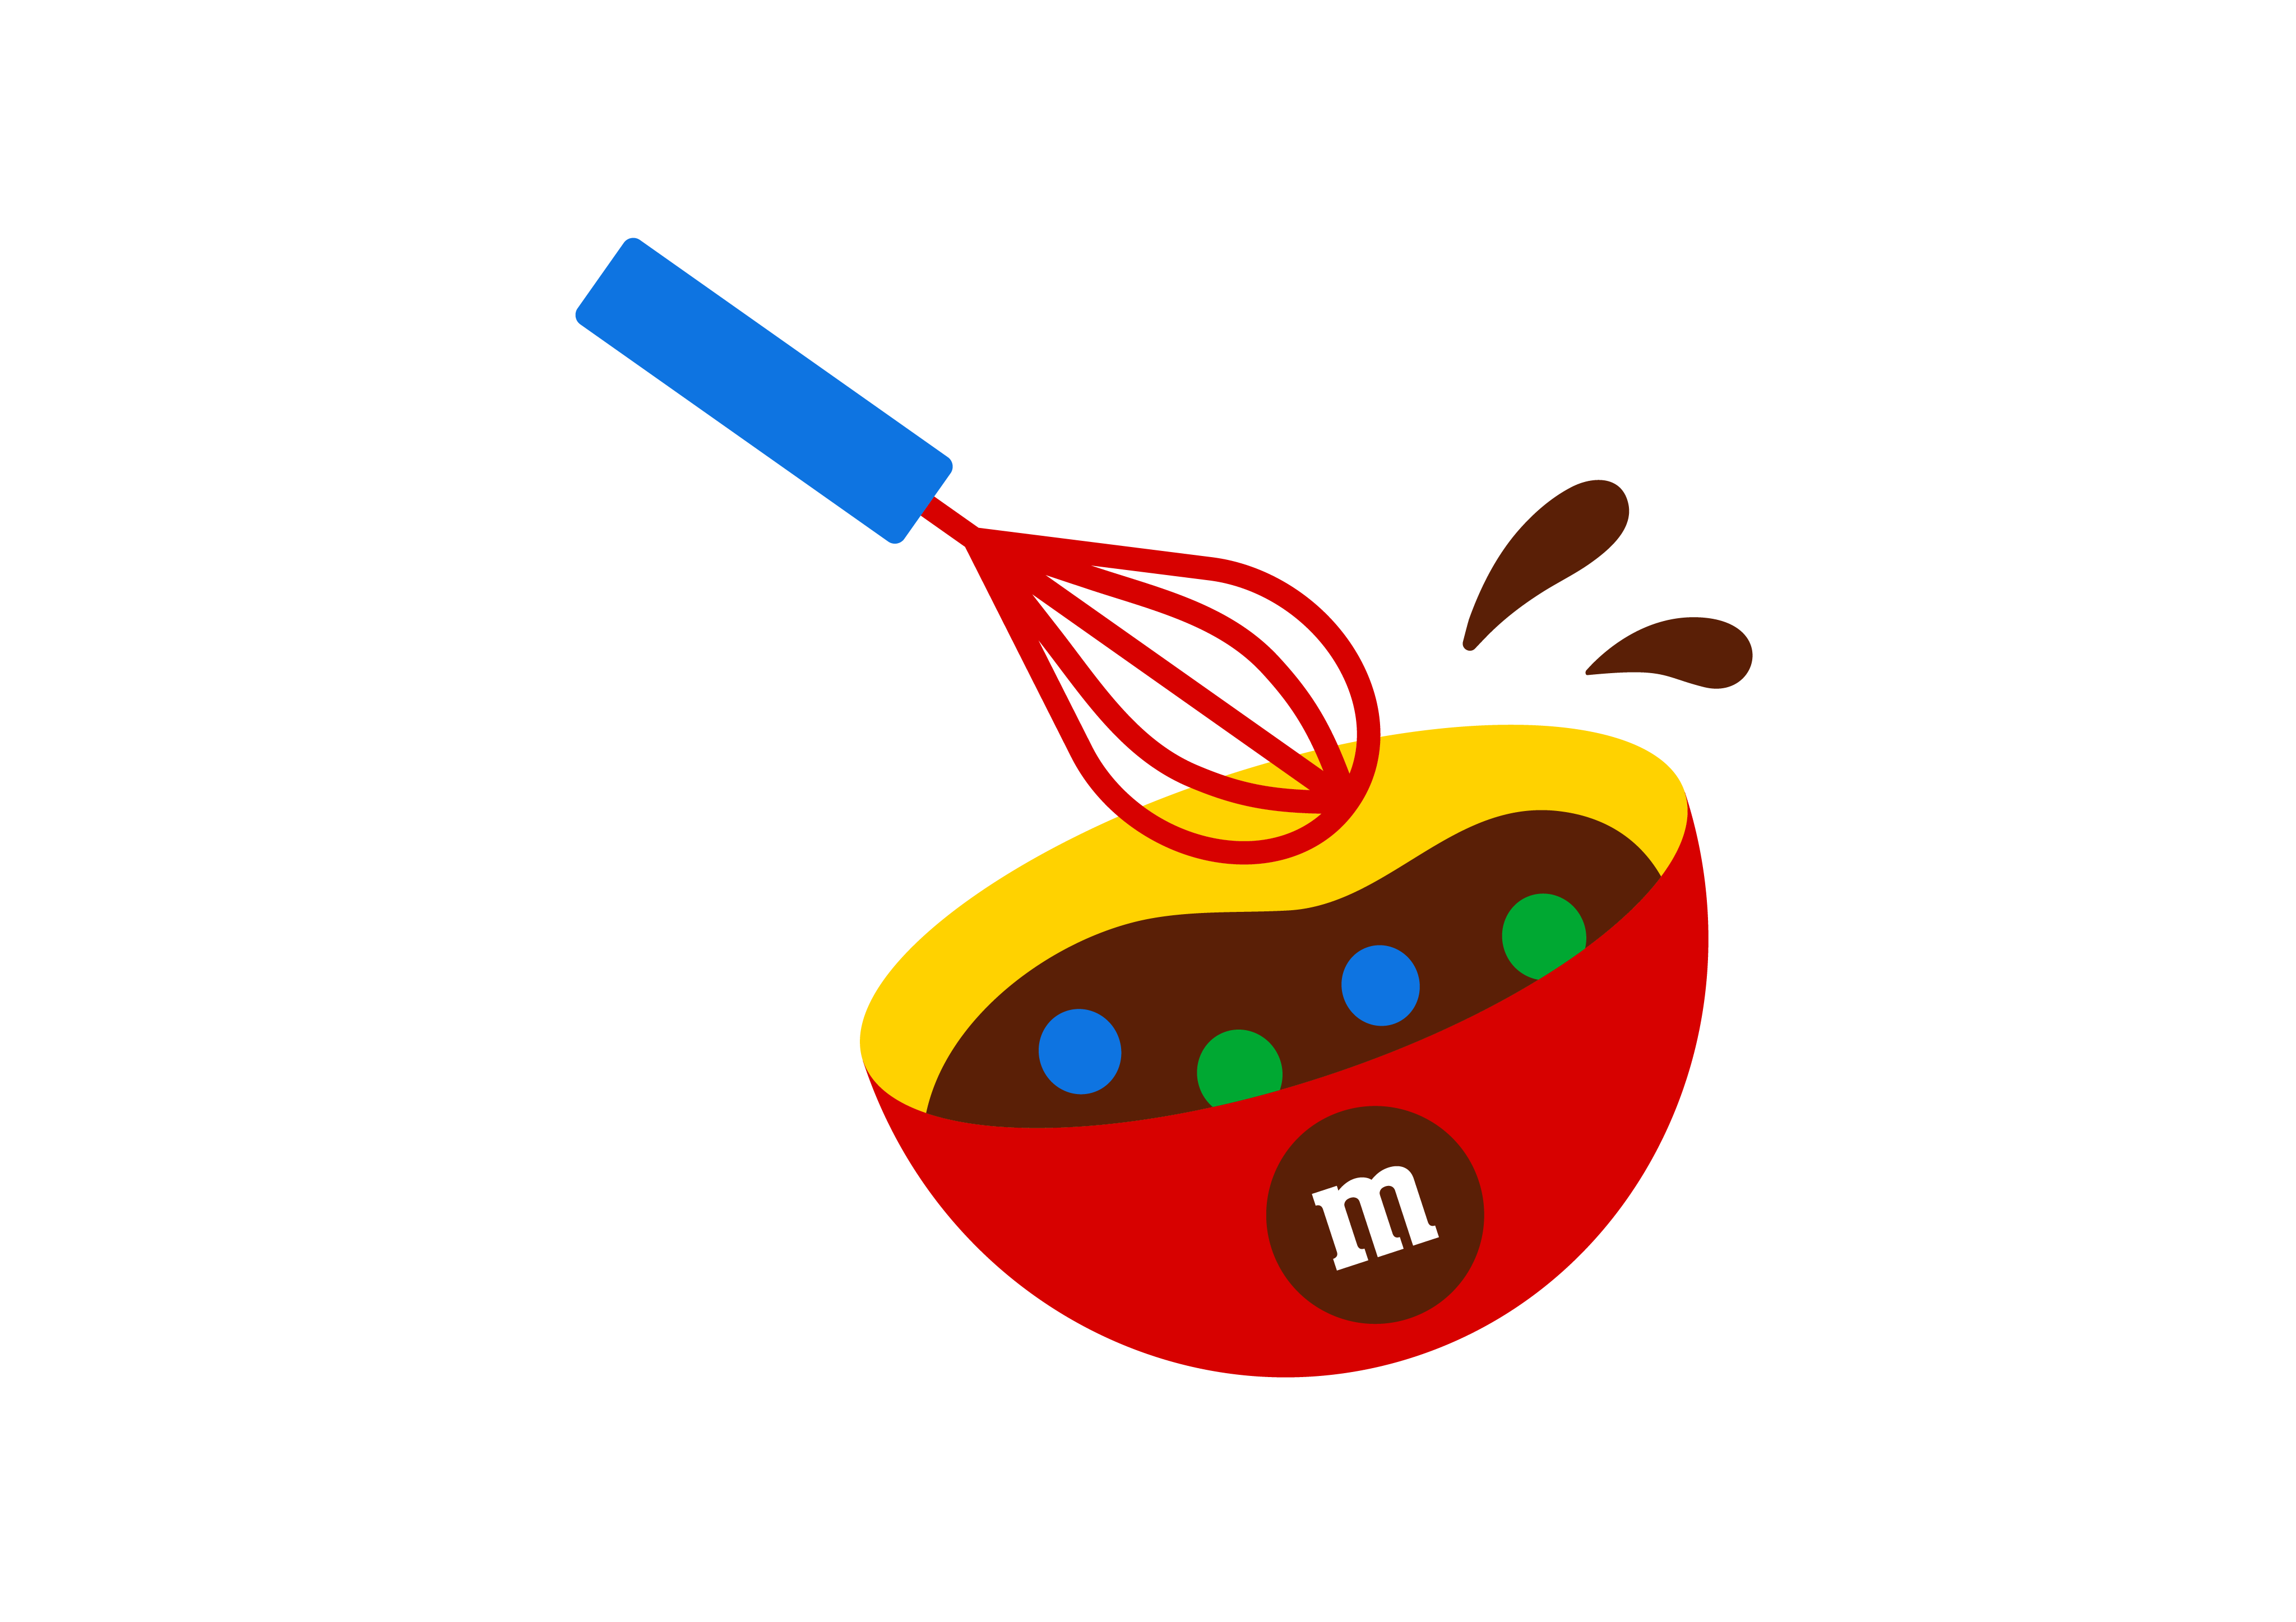 M&M's Characters - Giant Bomb